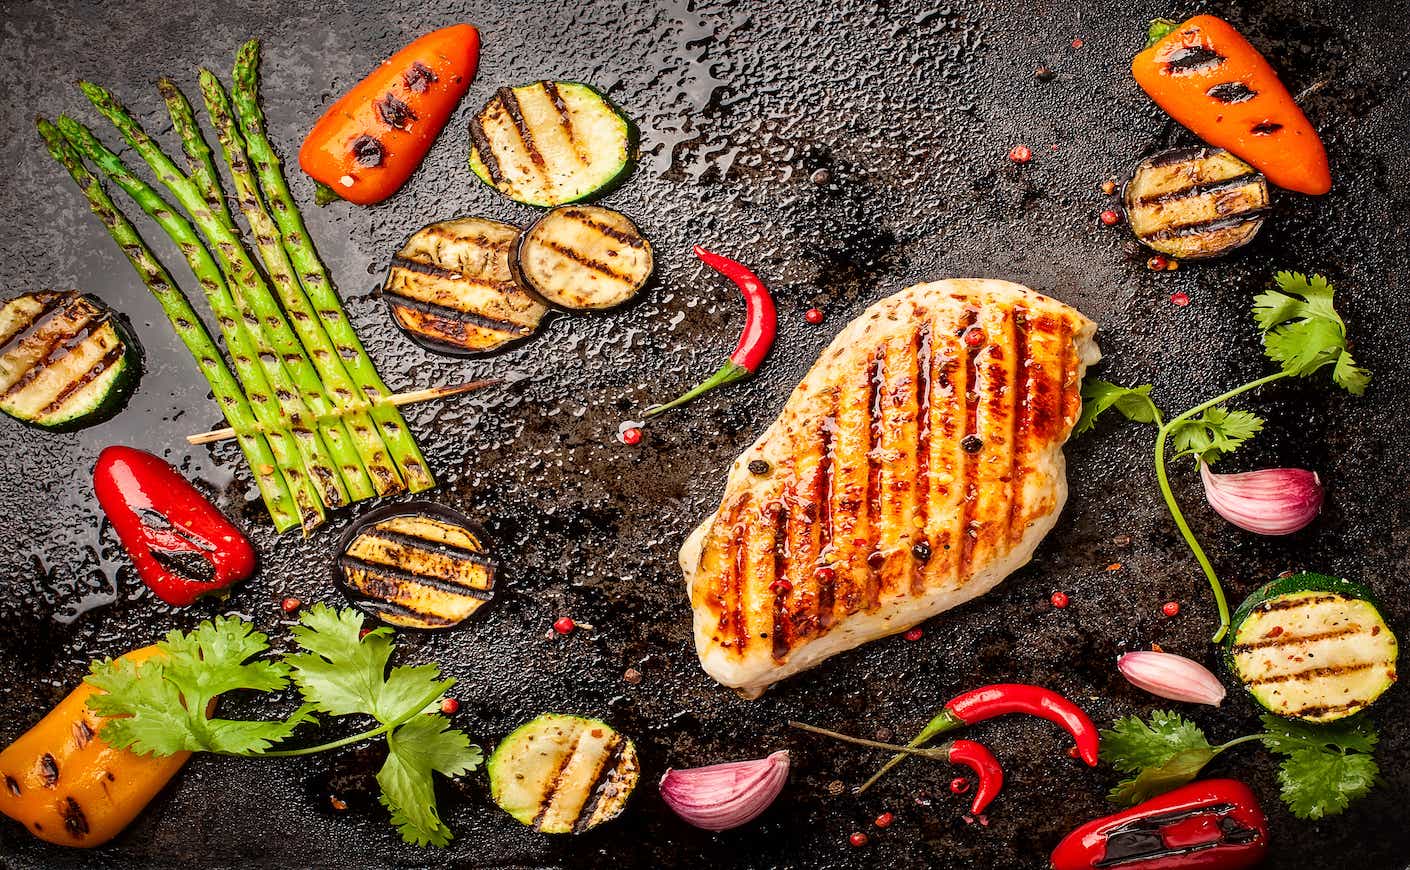 Spicy grilled chicken breast with herbs and grilled vegetables